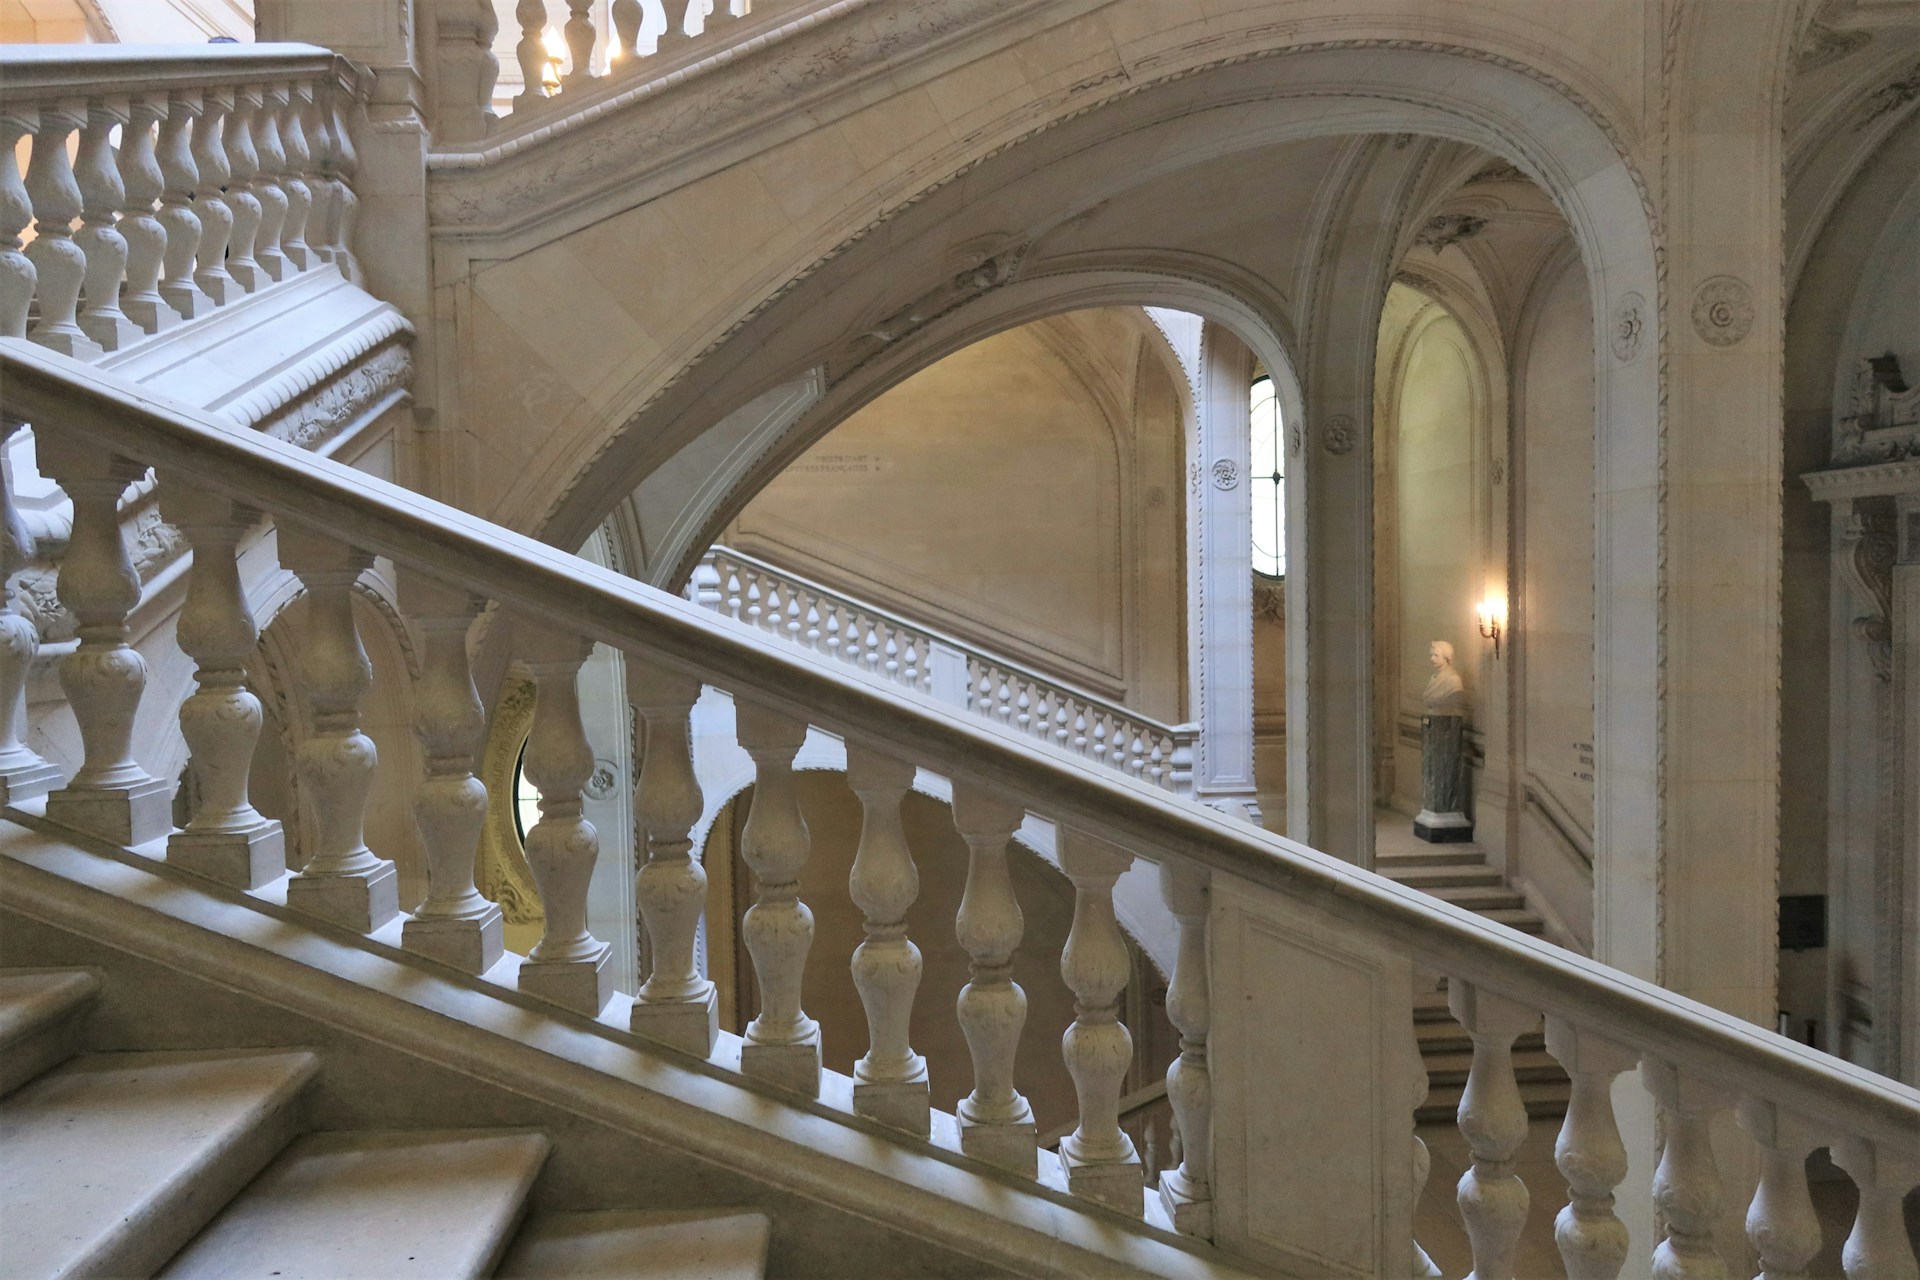 Baluster vs Balustrade - What's the difference?